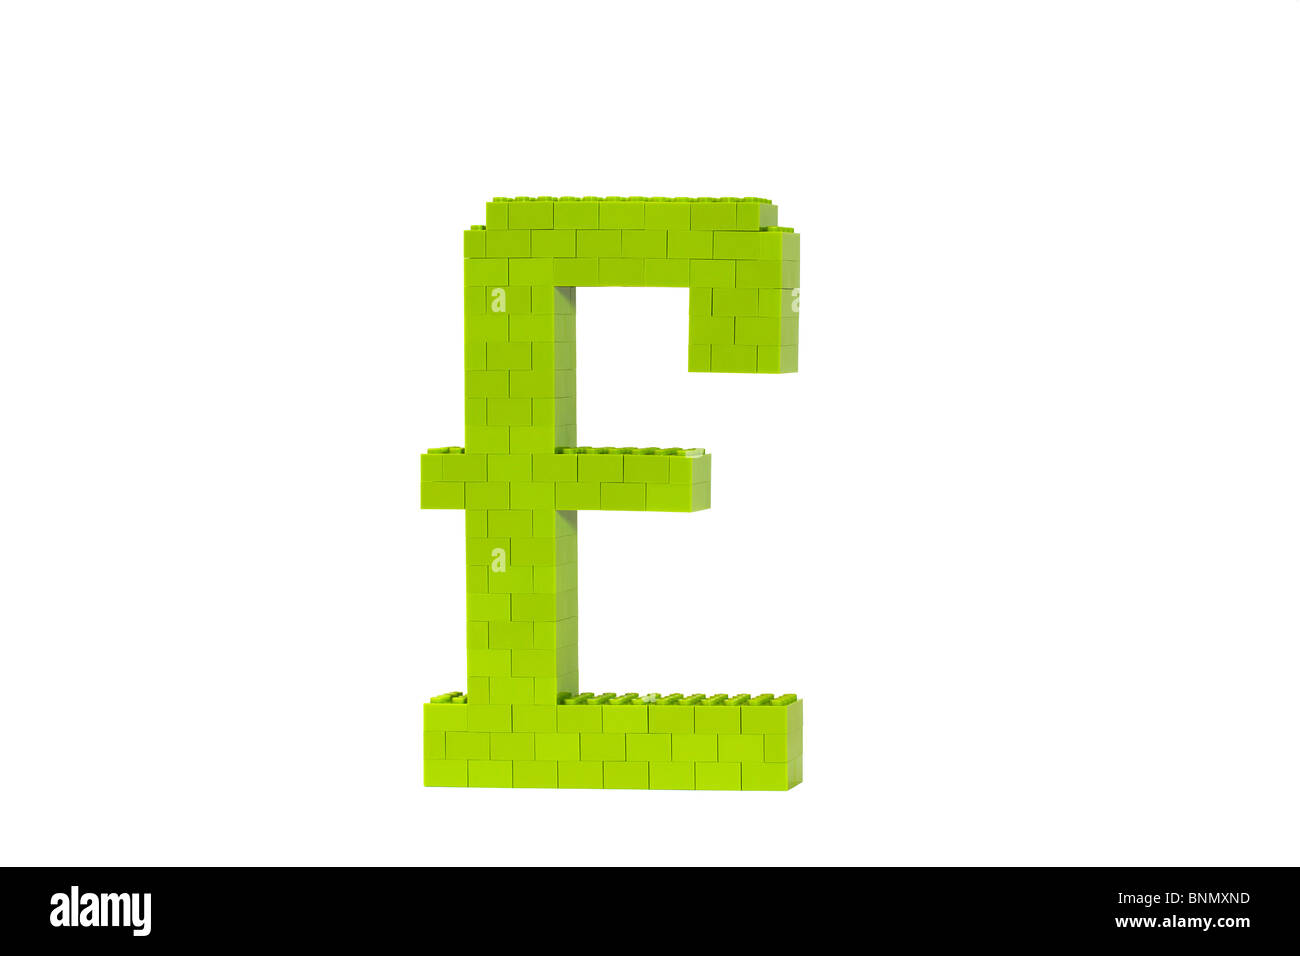 A green Pound symbol (GBP) constructed from toy bricks and shot against a white background at an angle to show it's 3D nature. Stock Photo